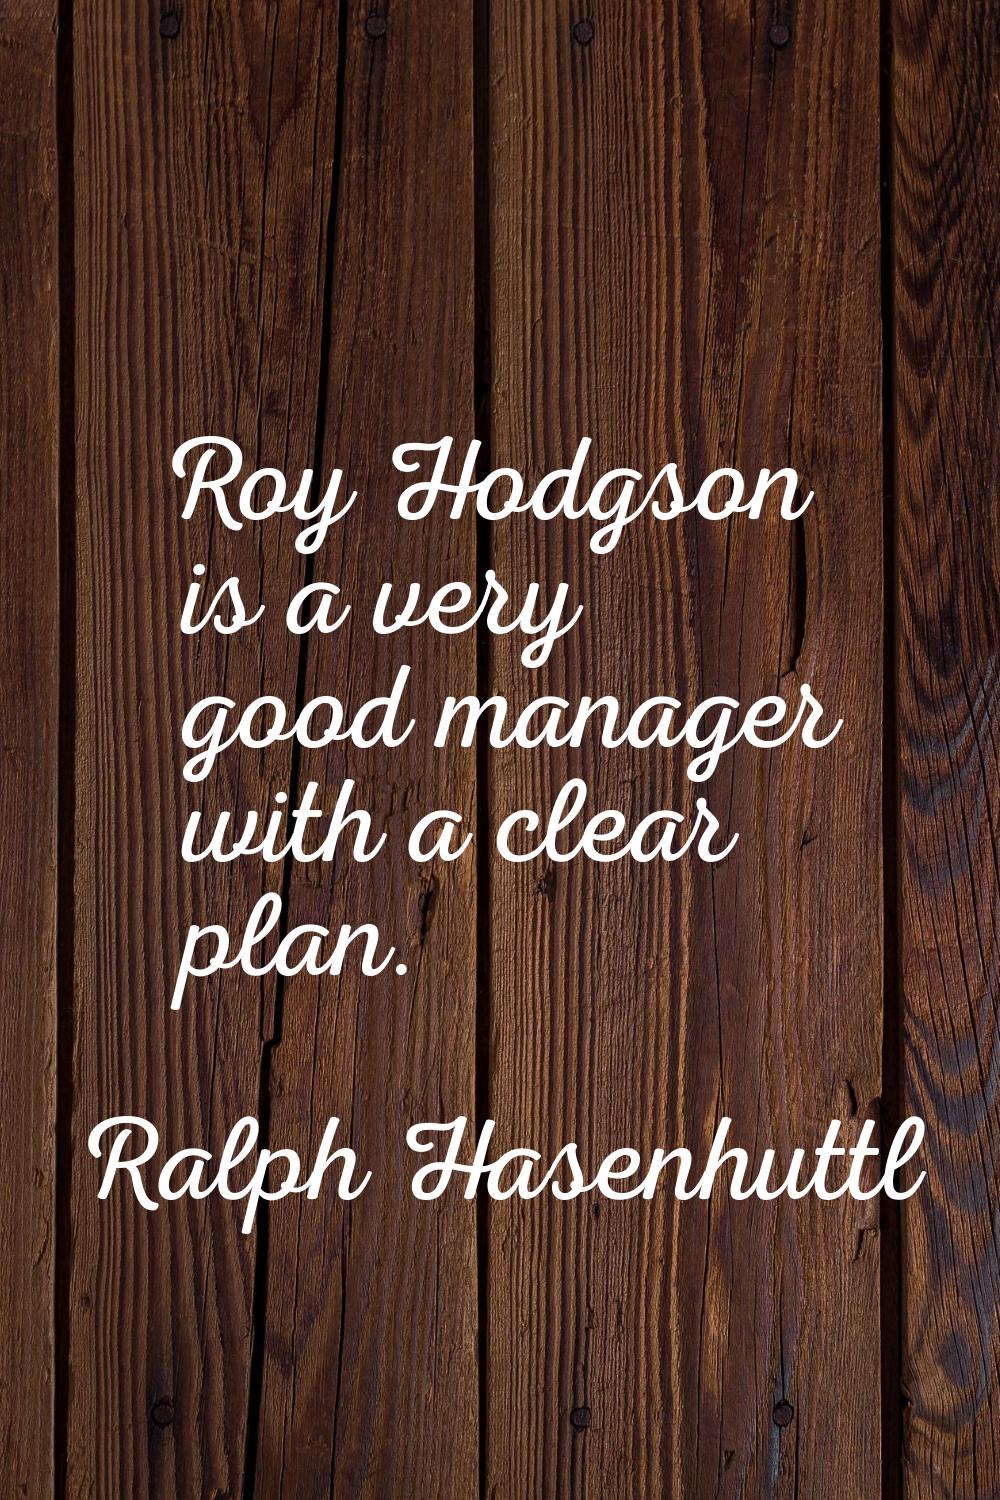 Roy Hodgson is a very good manager with a clear plan.